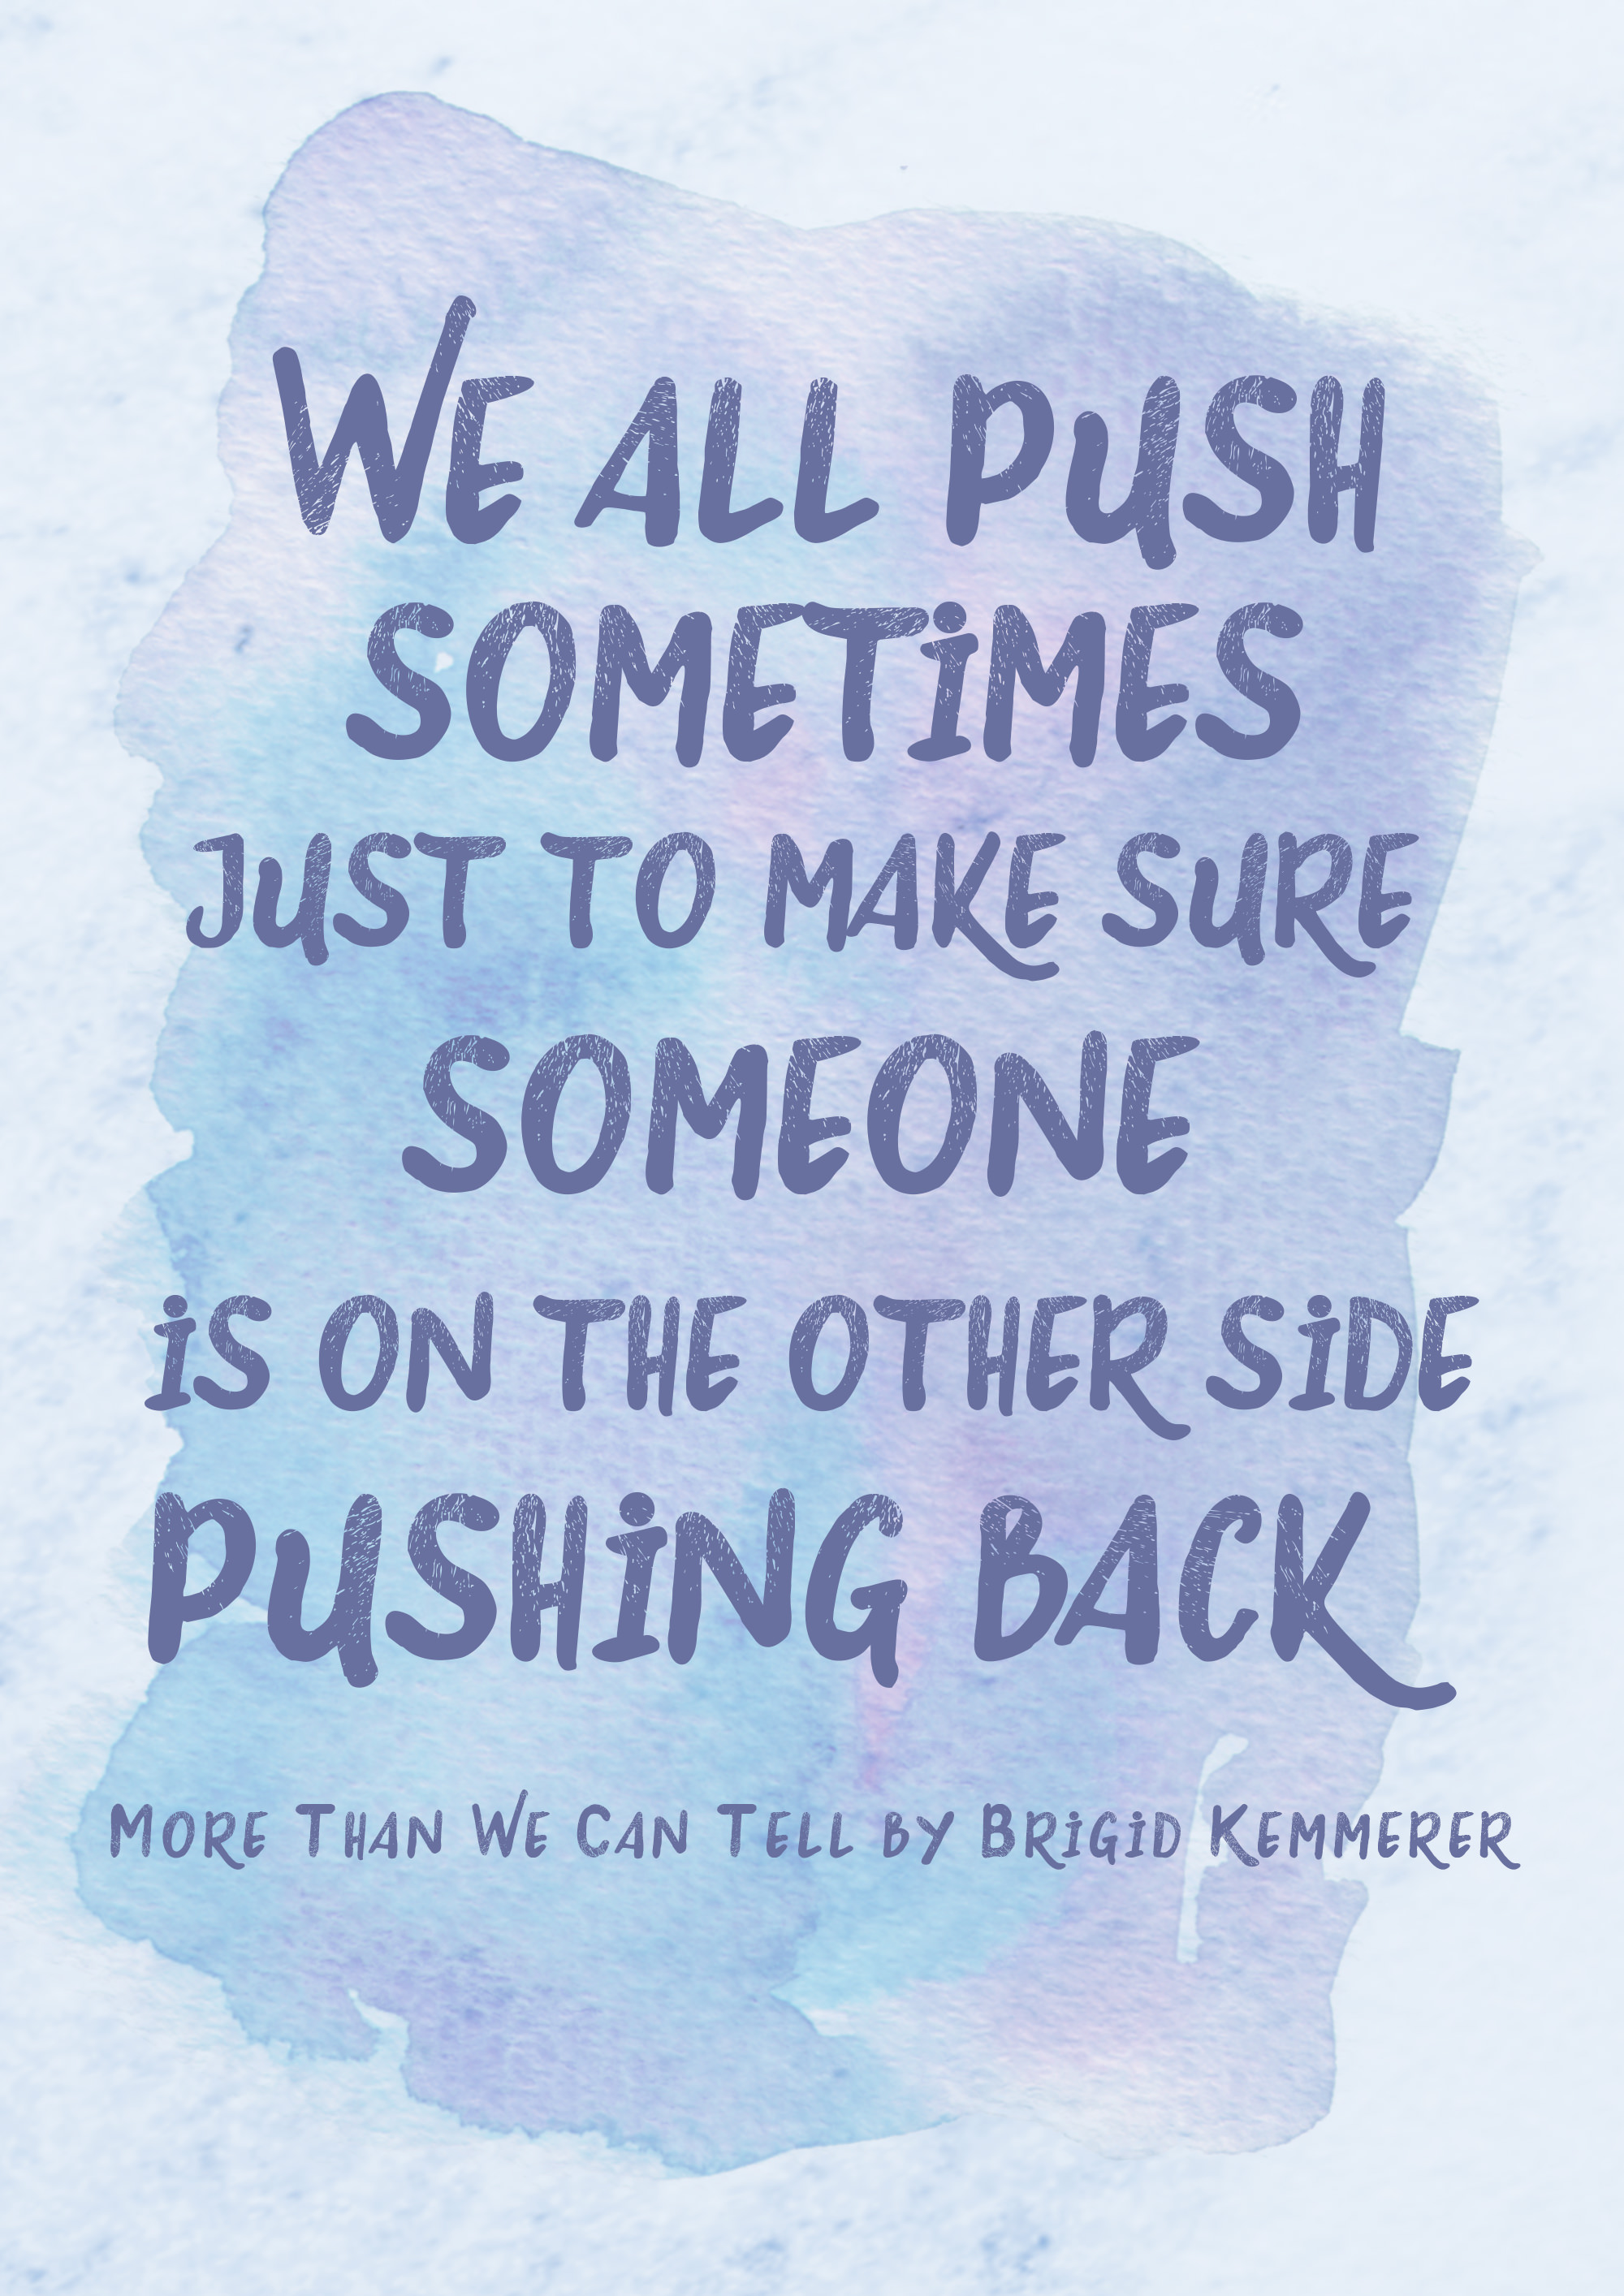 More Than We Can Tell by Brigid Kemmerer Quote Poster - We all push sometimes just to make sure someone is on the other side pushing back